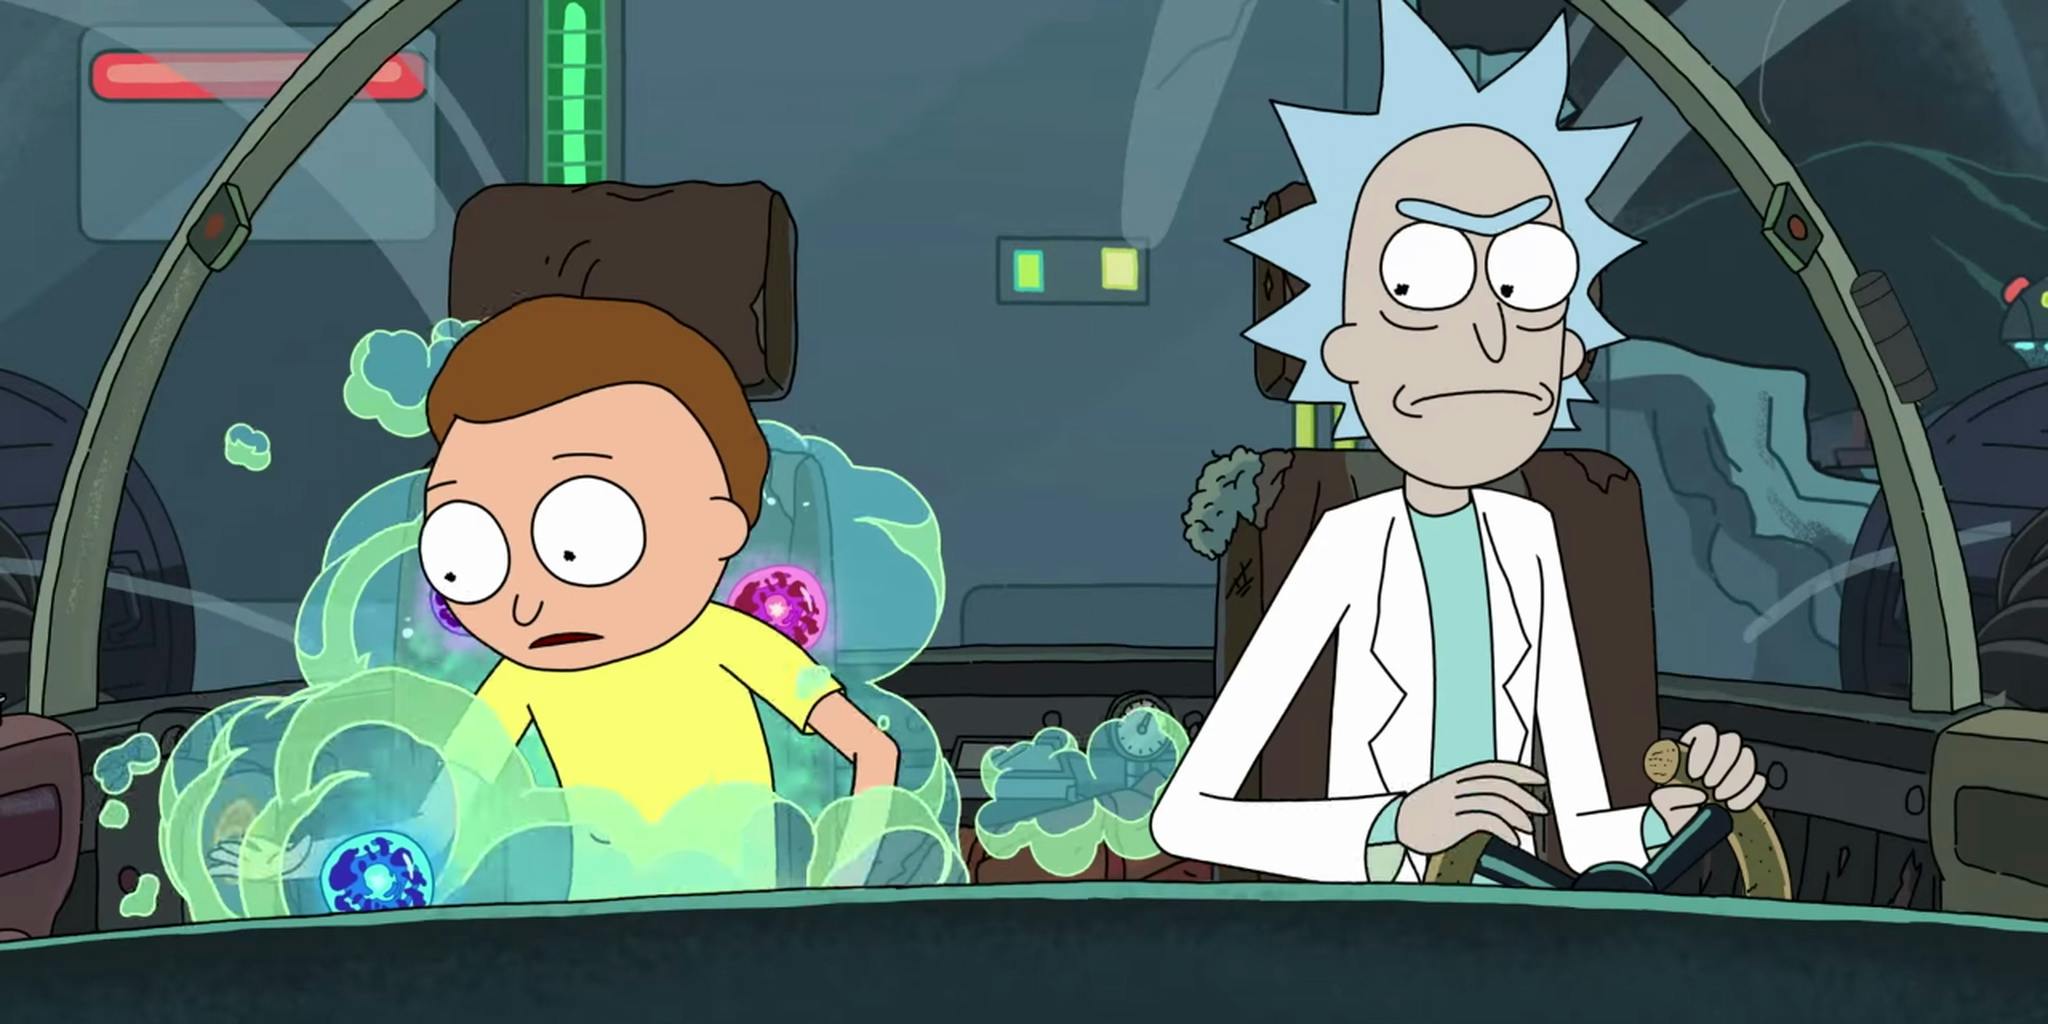 2 'Rick and Morty' episodes leak online a month ahead of schedule